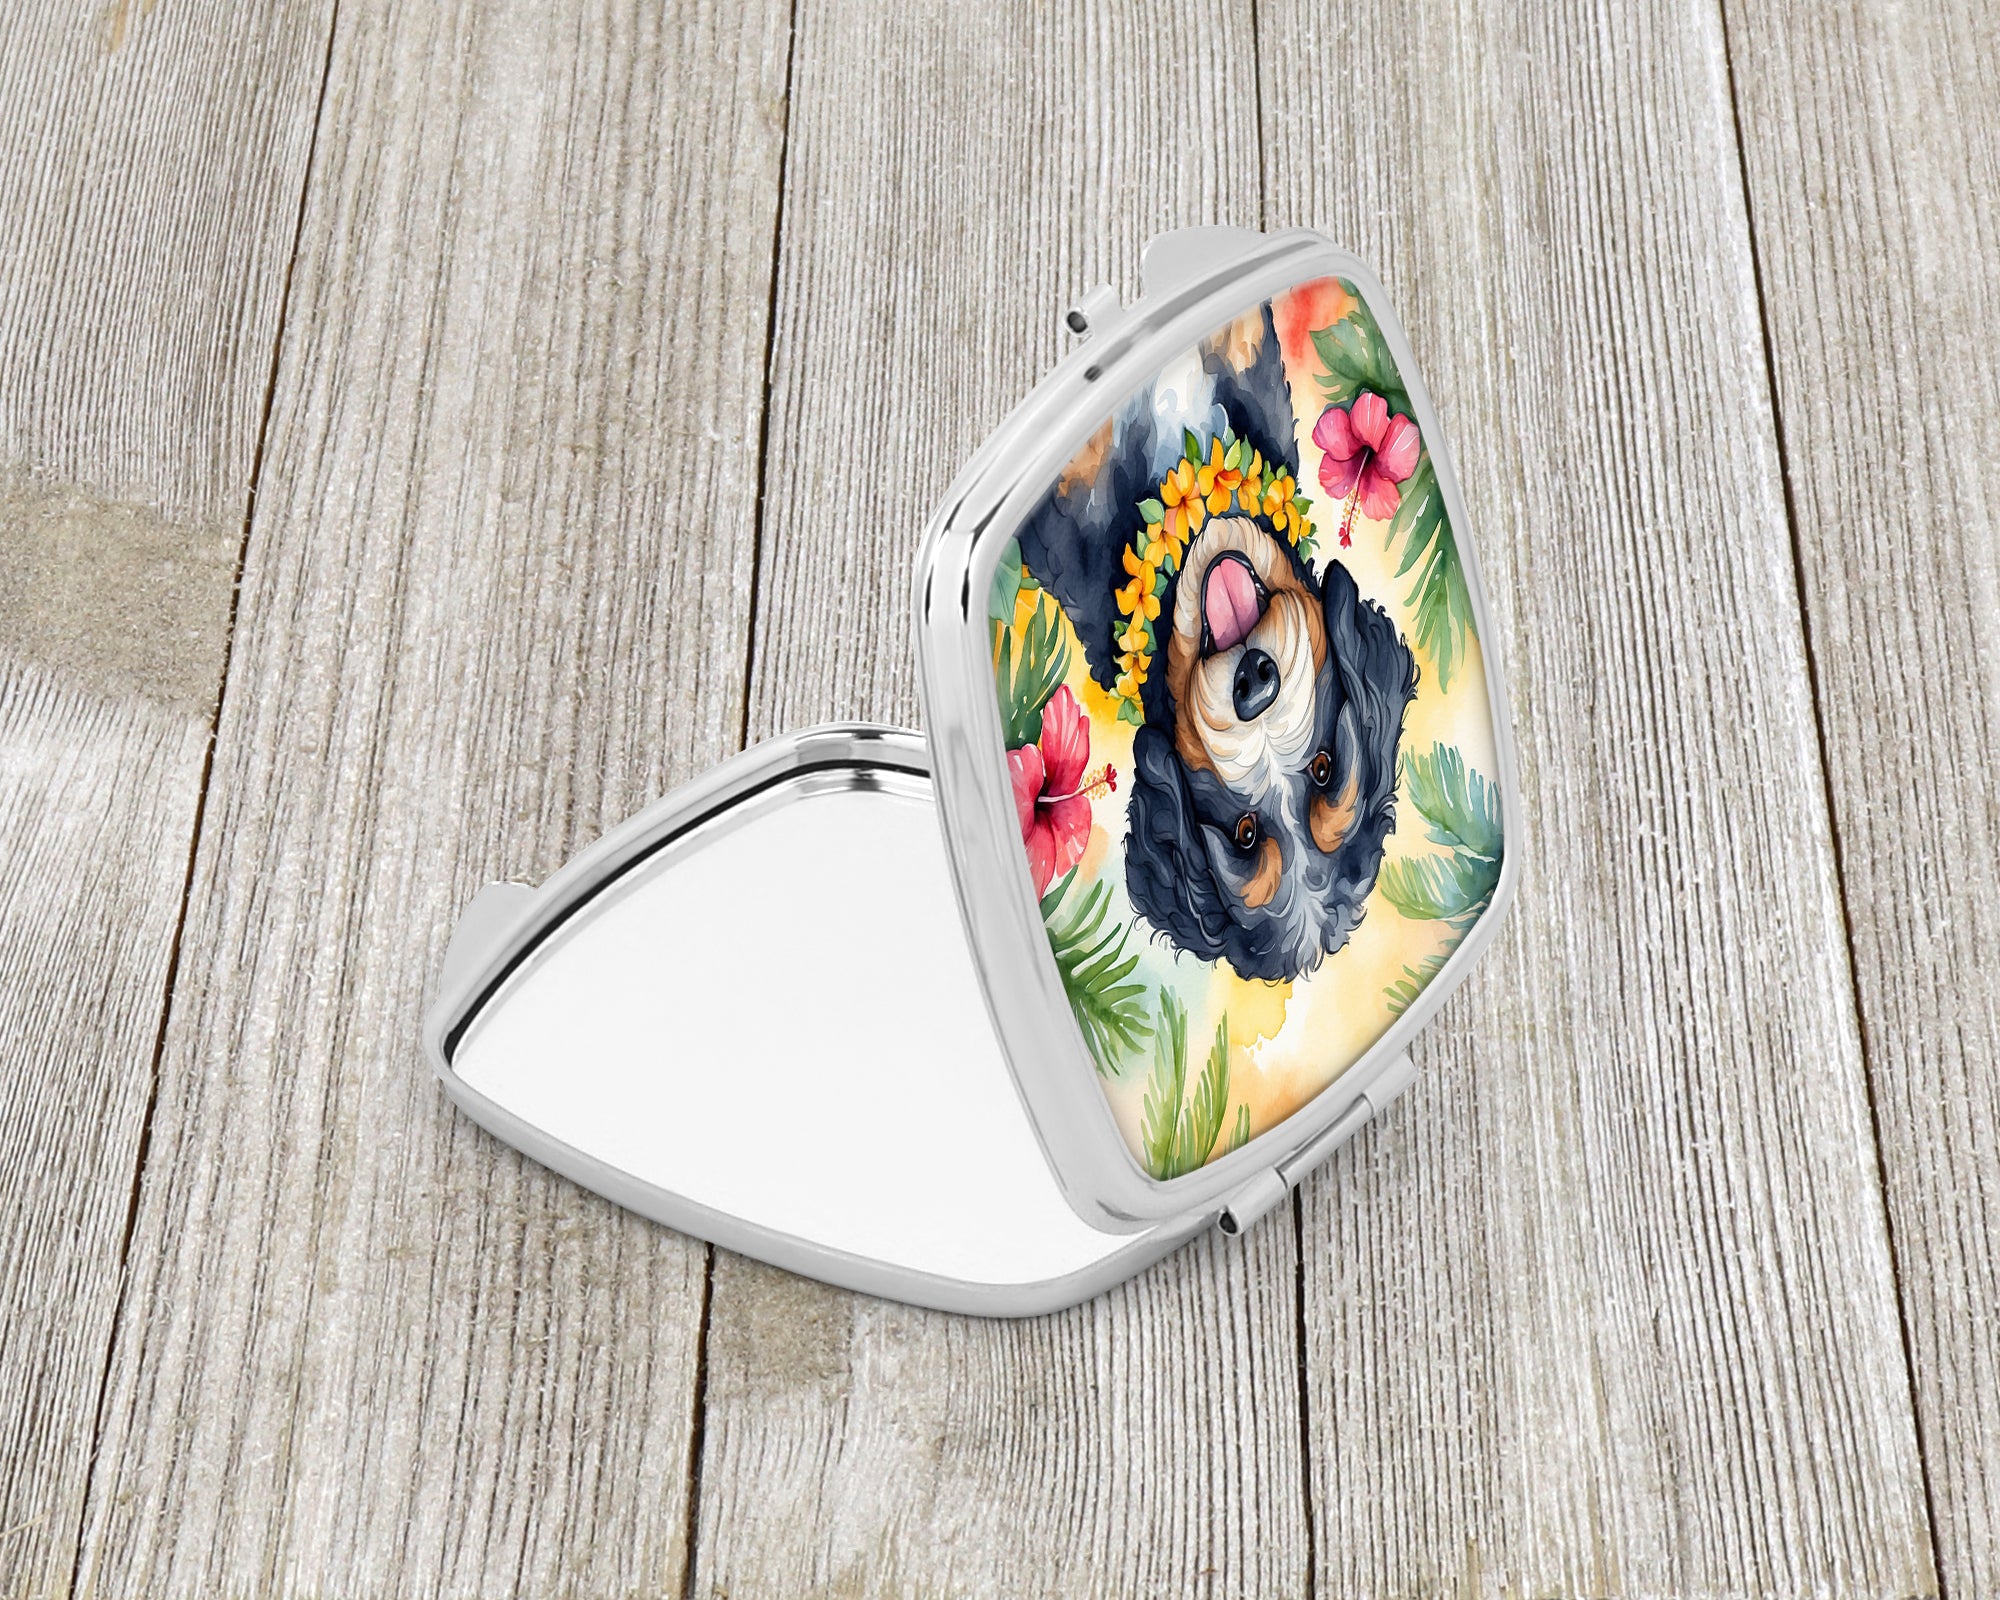 Buy this Bernedoodle Luau Compact Mirror